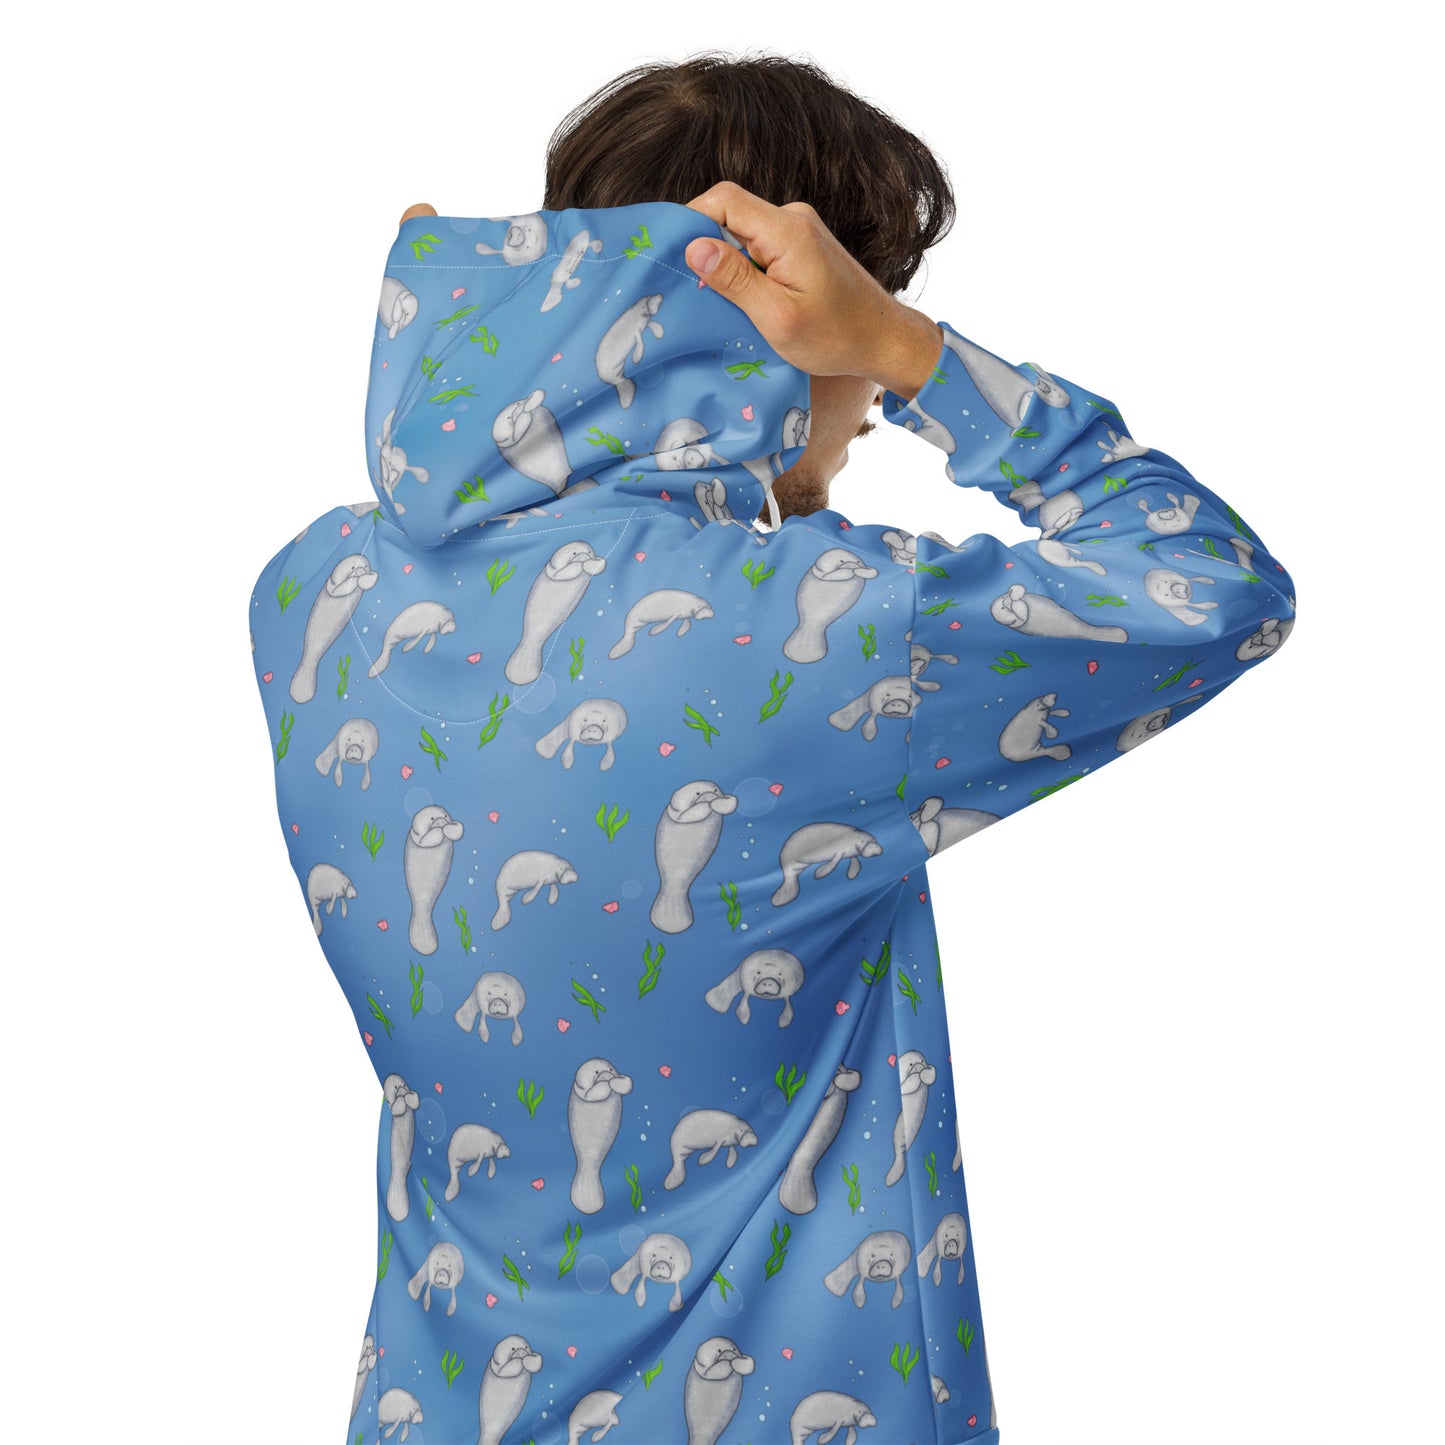 Unisex patterned manatee zip up hoodie. Made with recycled polyester. Soft cotton-feel outside fabric and fleece inside. Metal zipper, eyelets, and drawcord tips. Back view shown on male model.